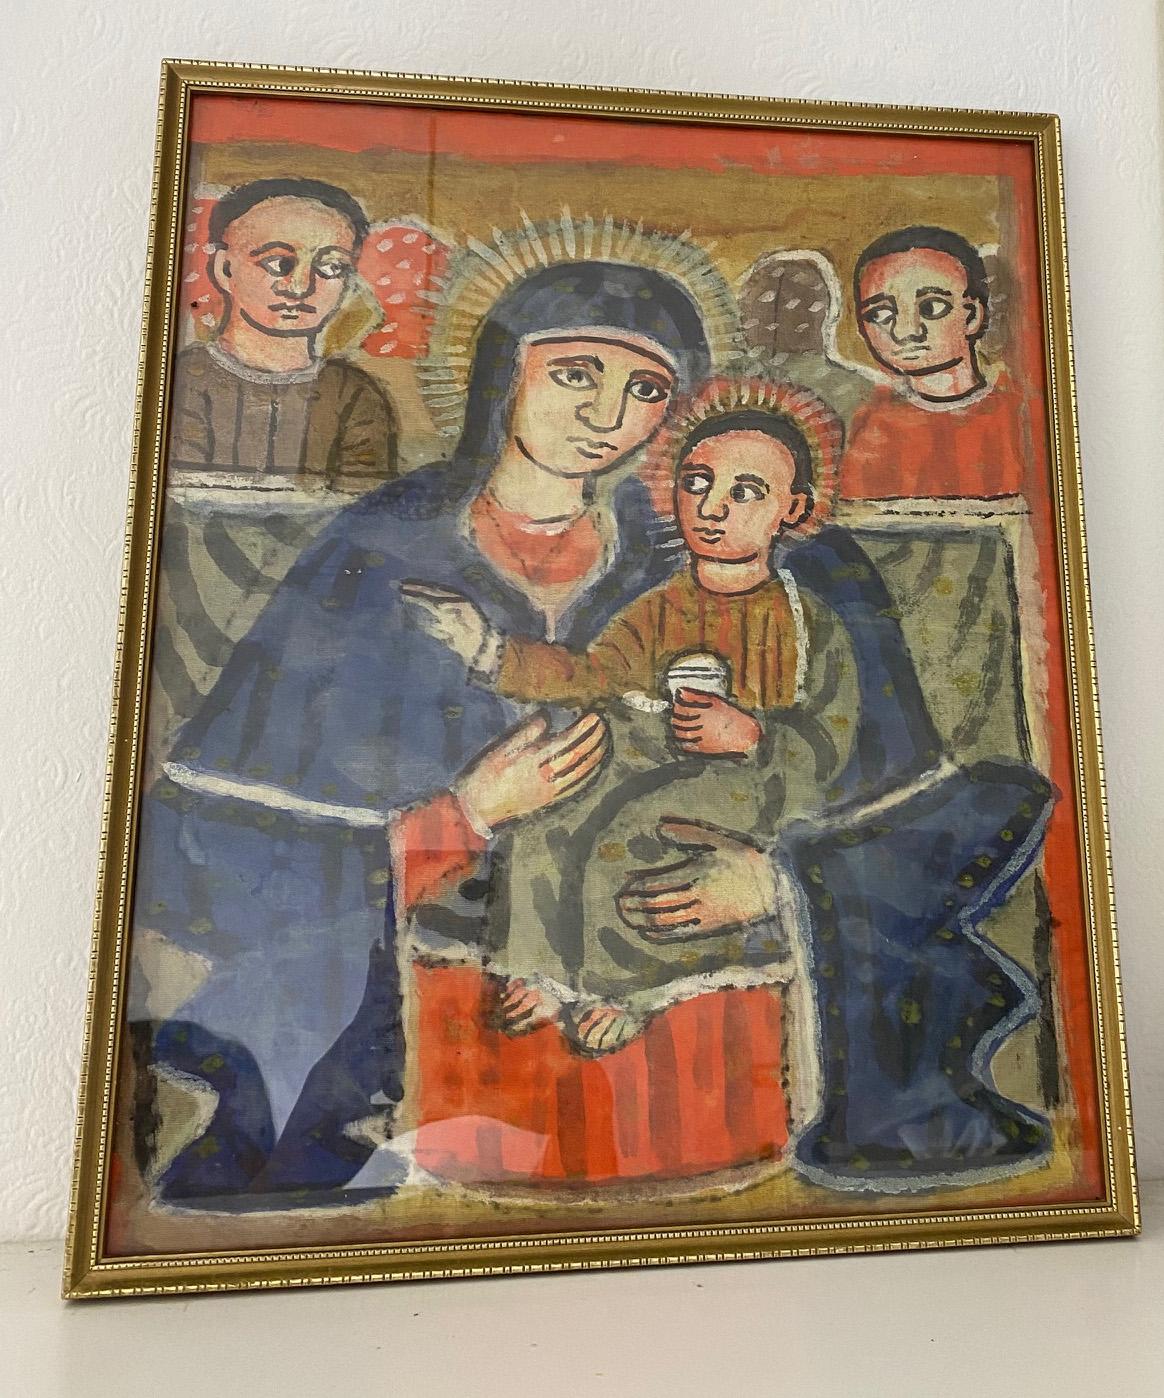 A charming vintage Ethiopian painting of the Madonna with baby Jesus flanked by angels.
The Ethiopian iconography of the Virgin and Child draws on the Byzantine iconic tradition, going back at least to the sixth century in which the Virgin is